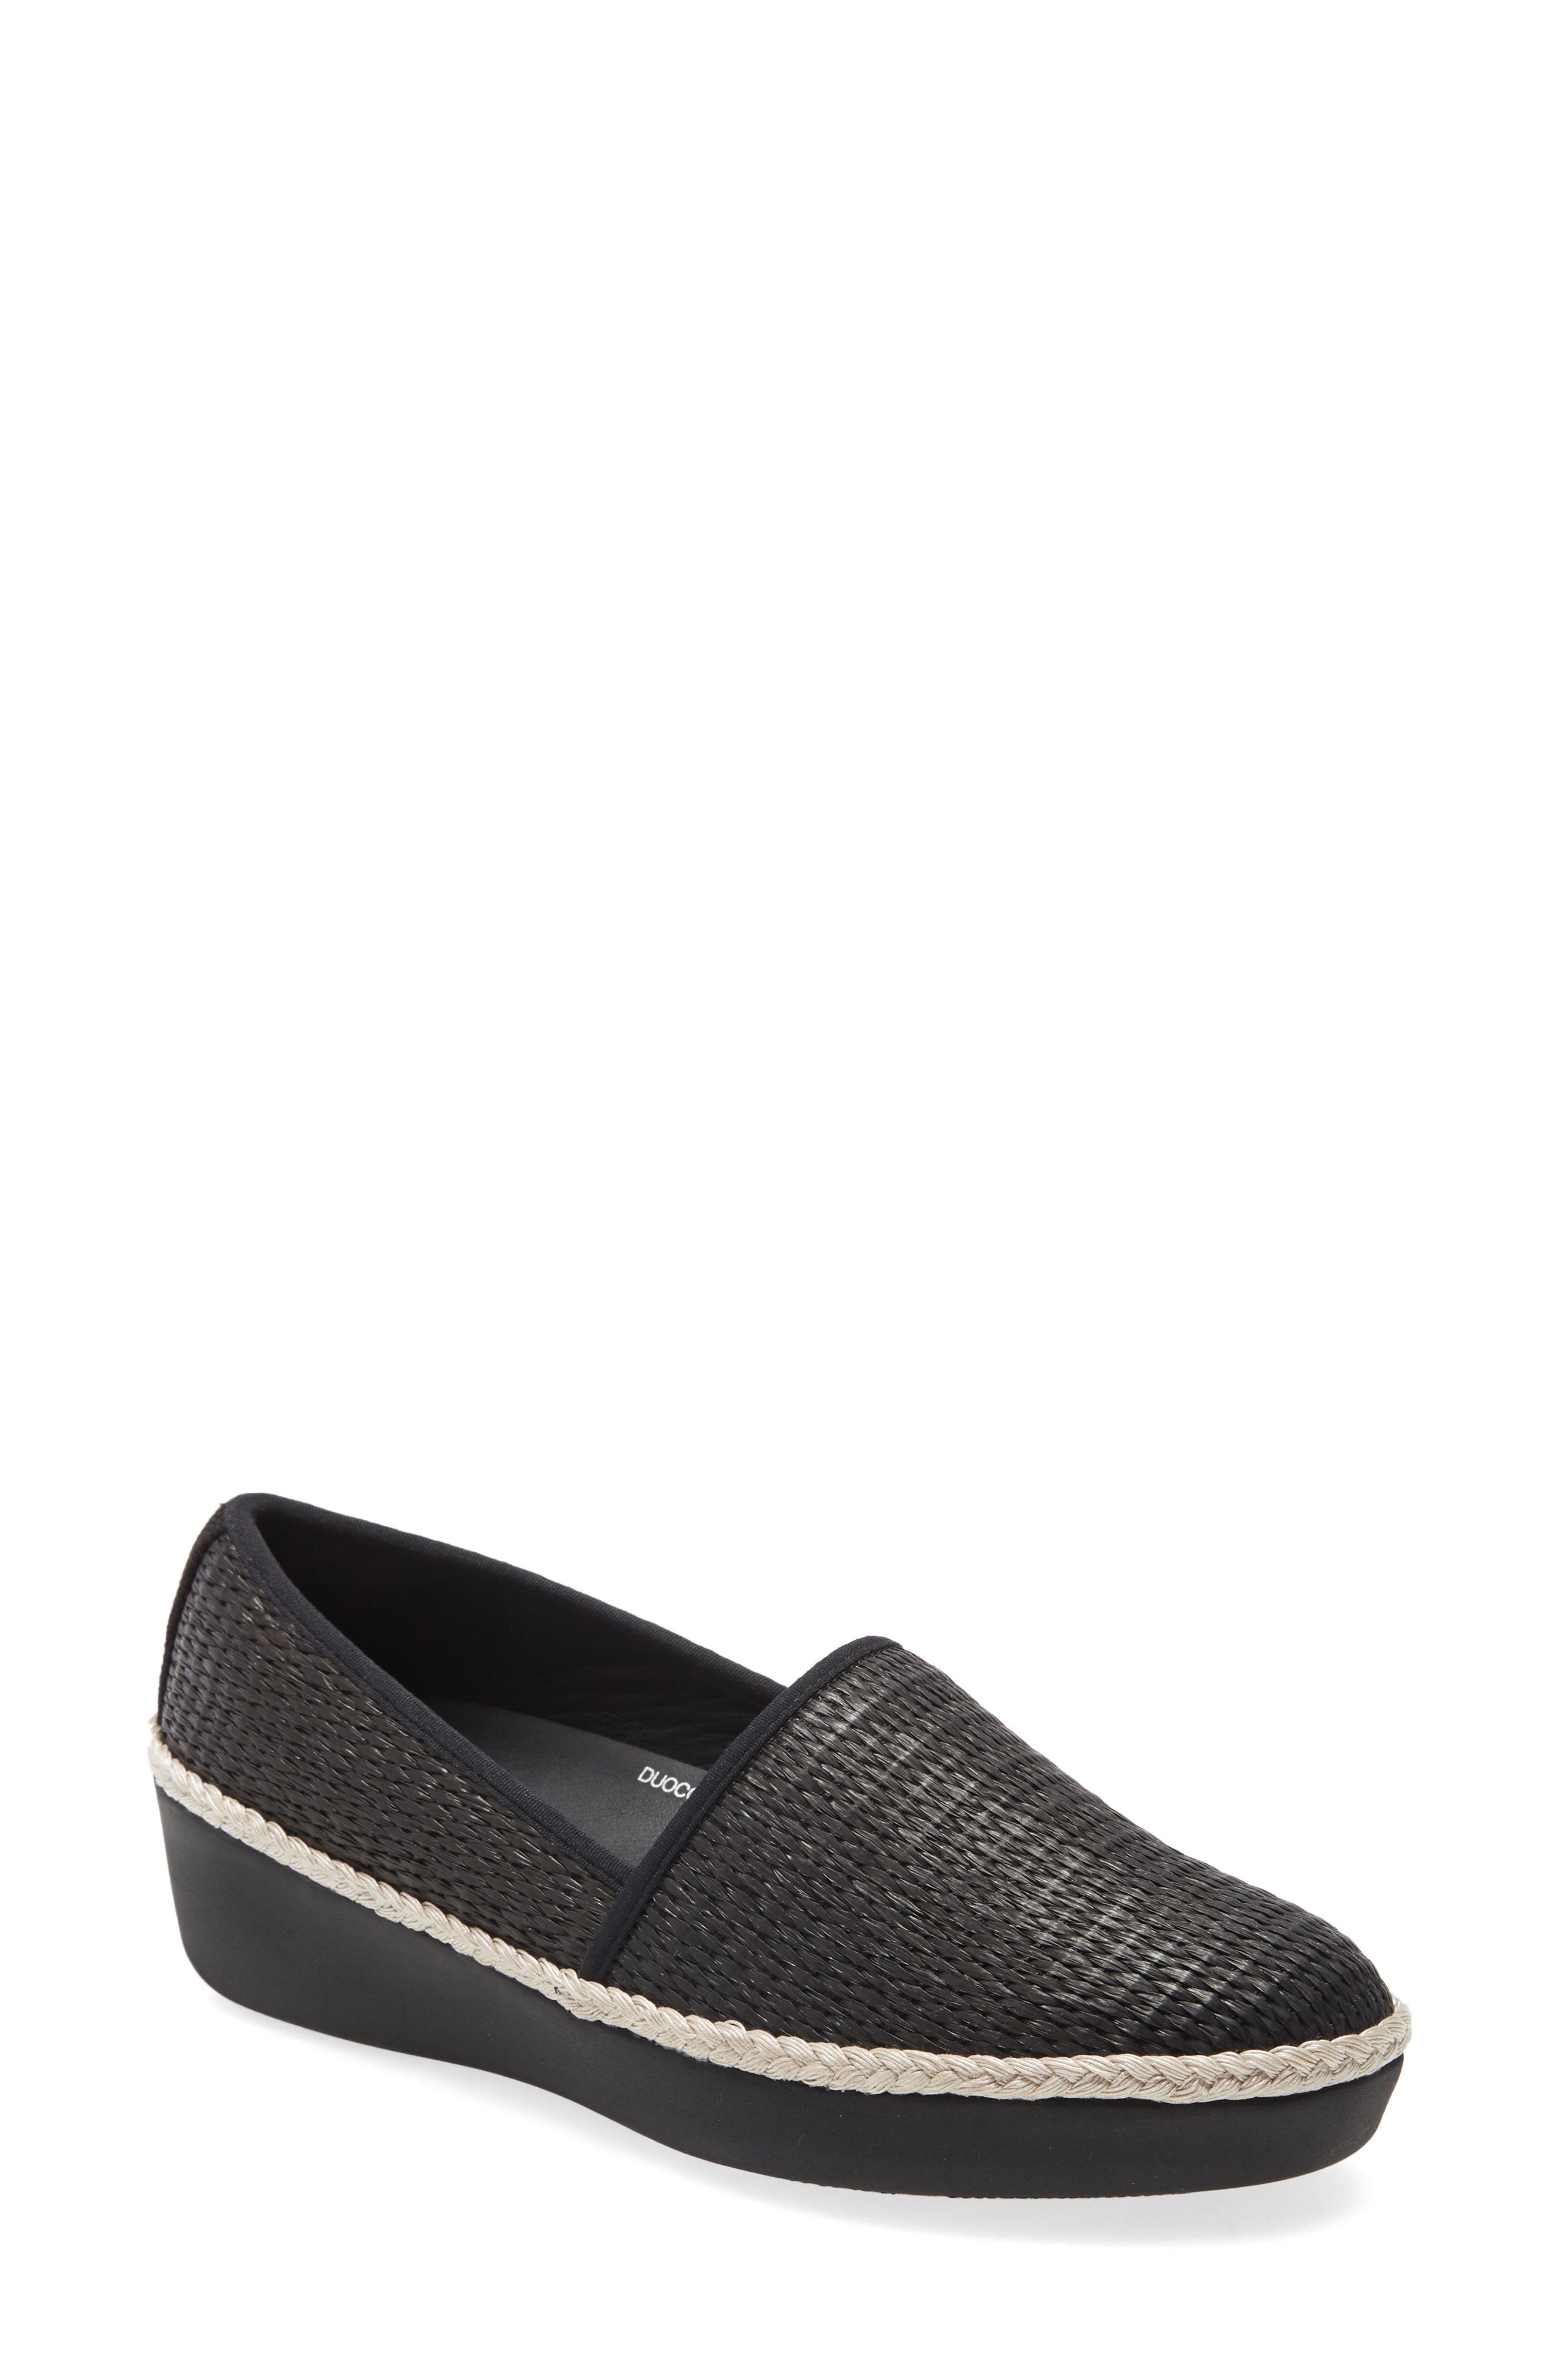 casa loafer fitflop